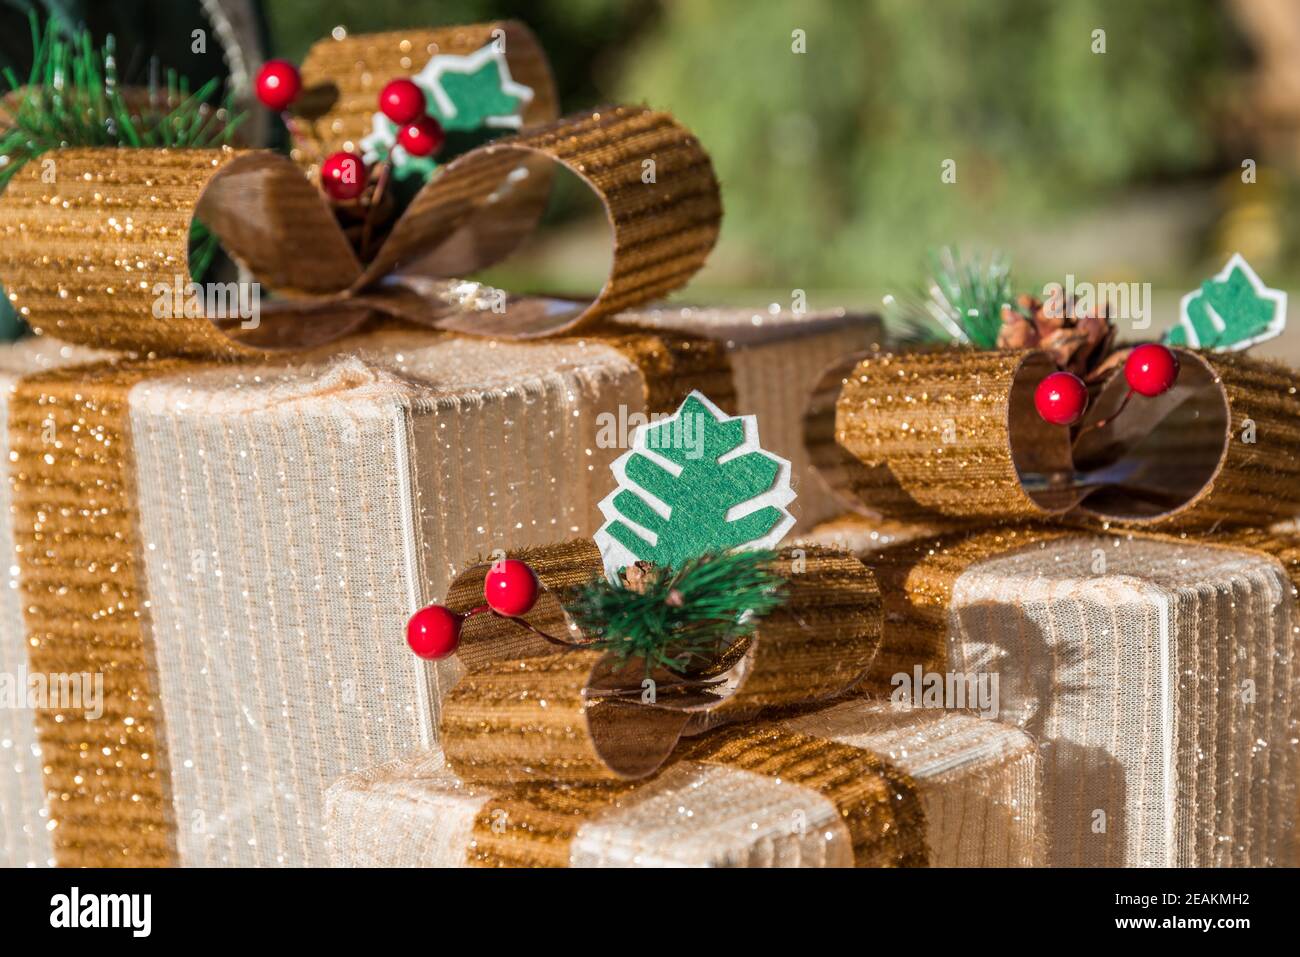 Christmas outdoor decoration - close-up Stock Photo